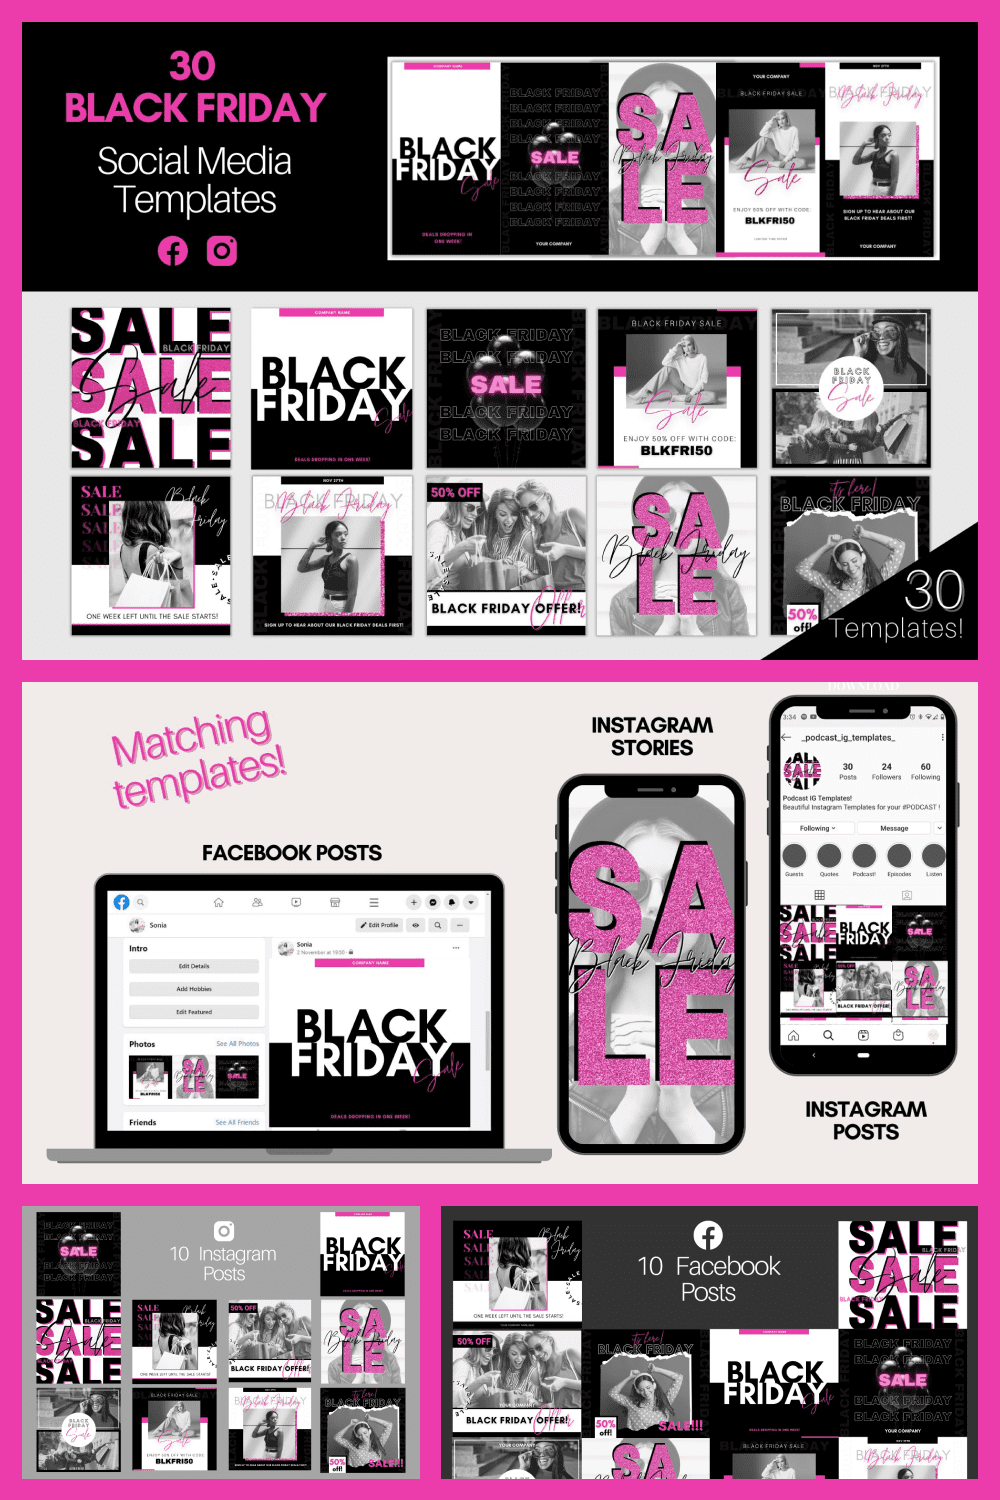 Social Media Pink and Black Templates with Glitter for Black Friday.